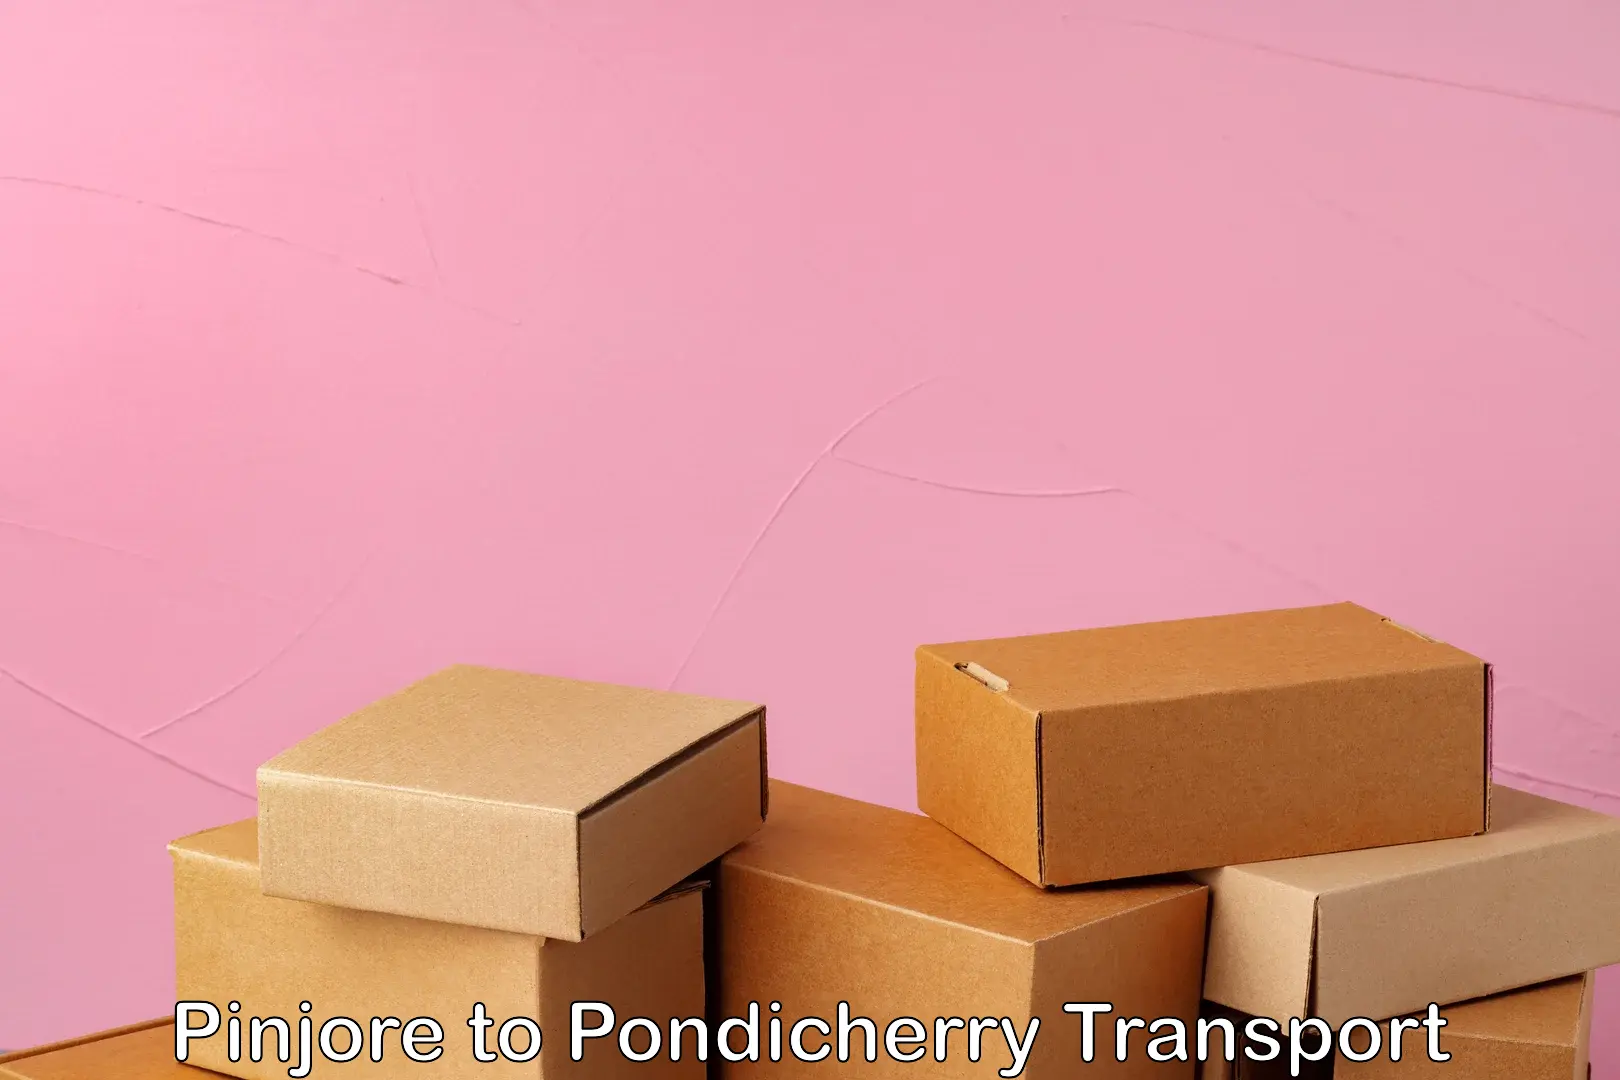 Container transport service Pinjore to Pondicherry